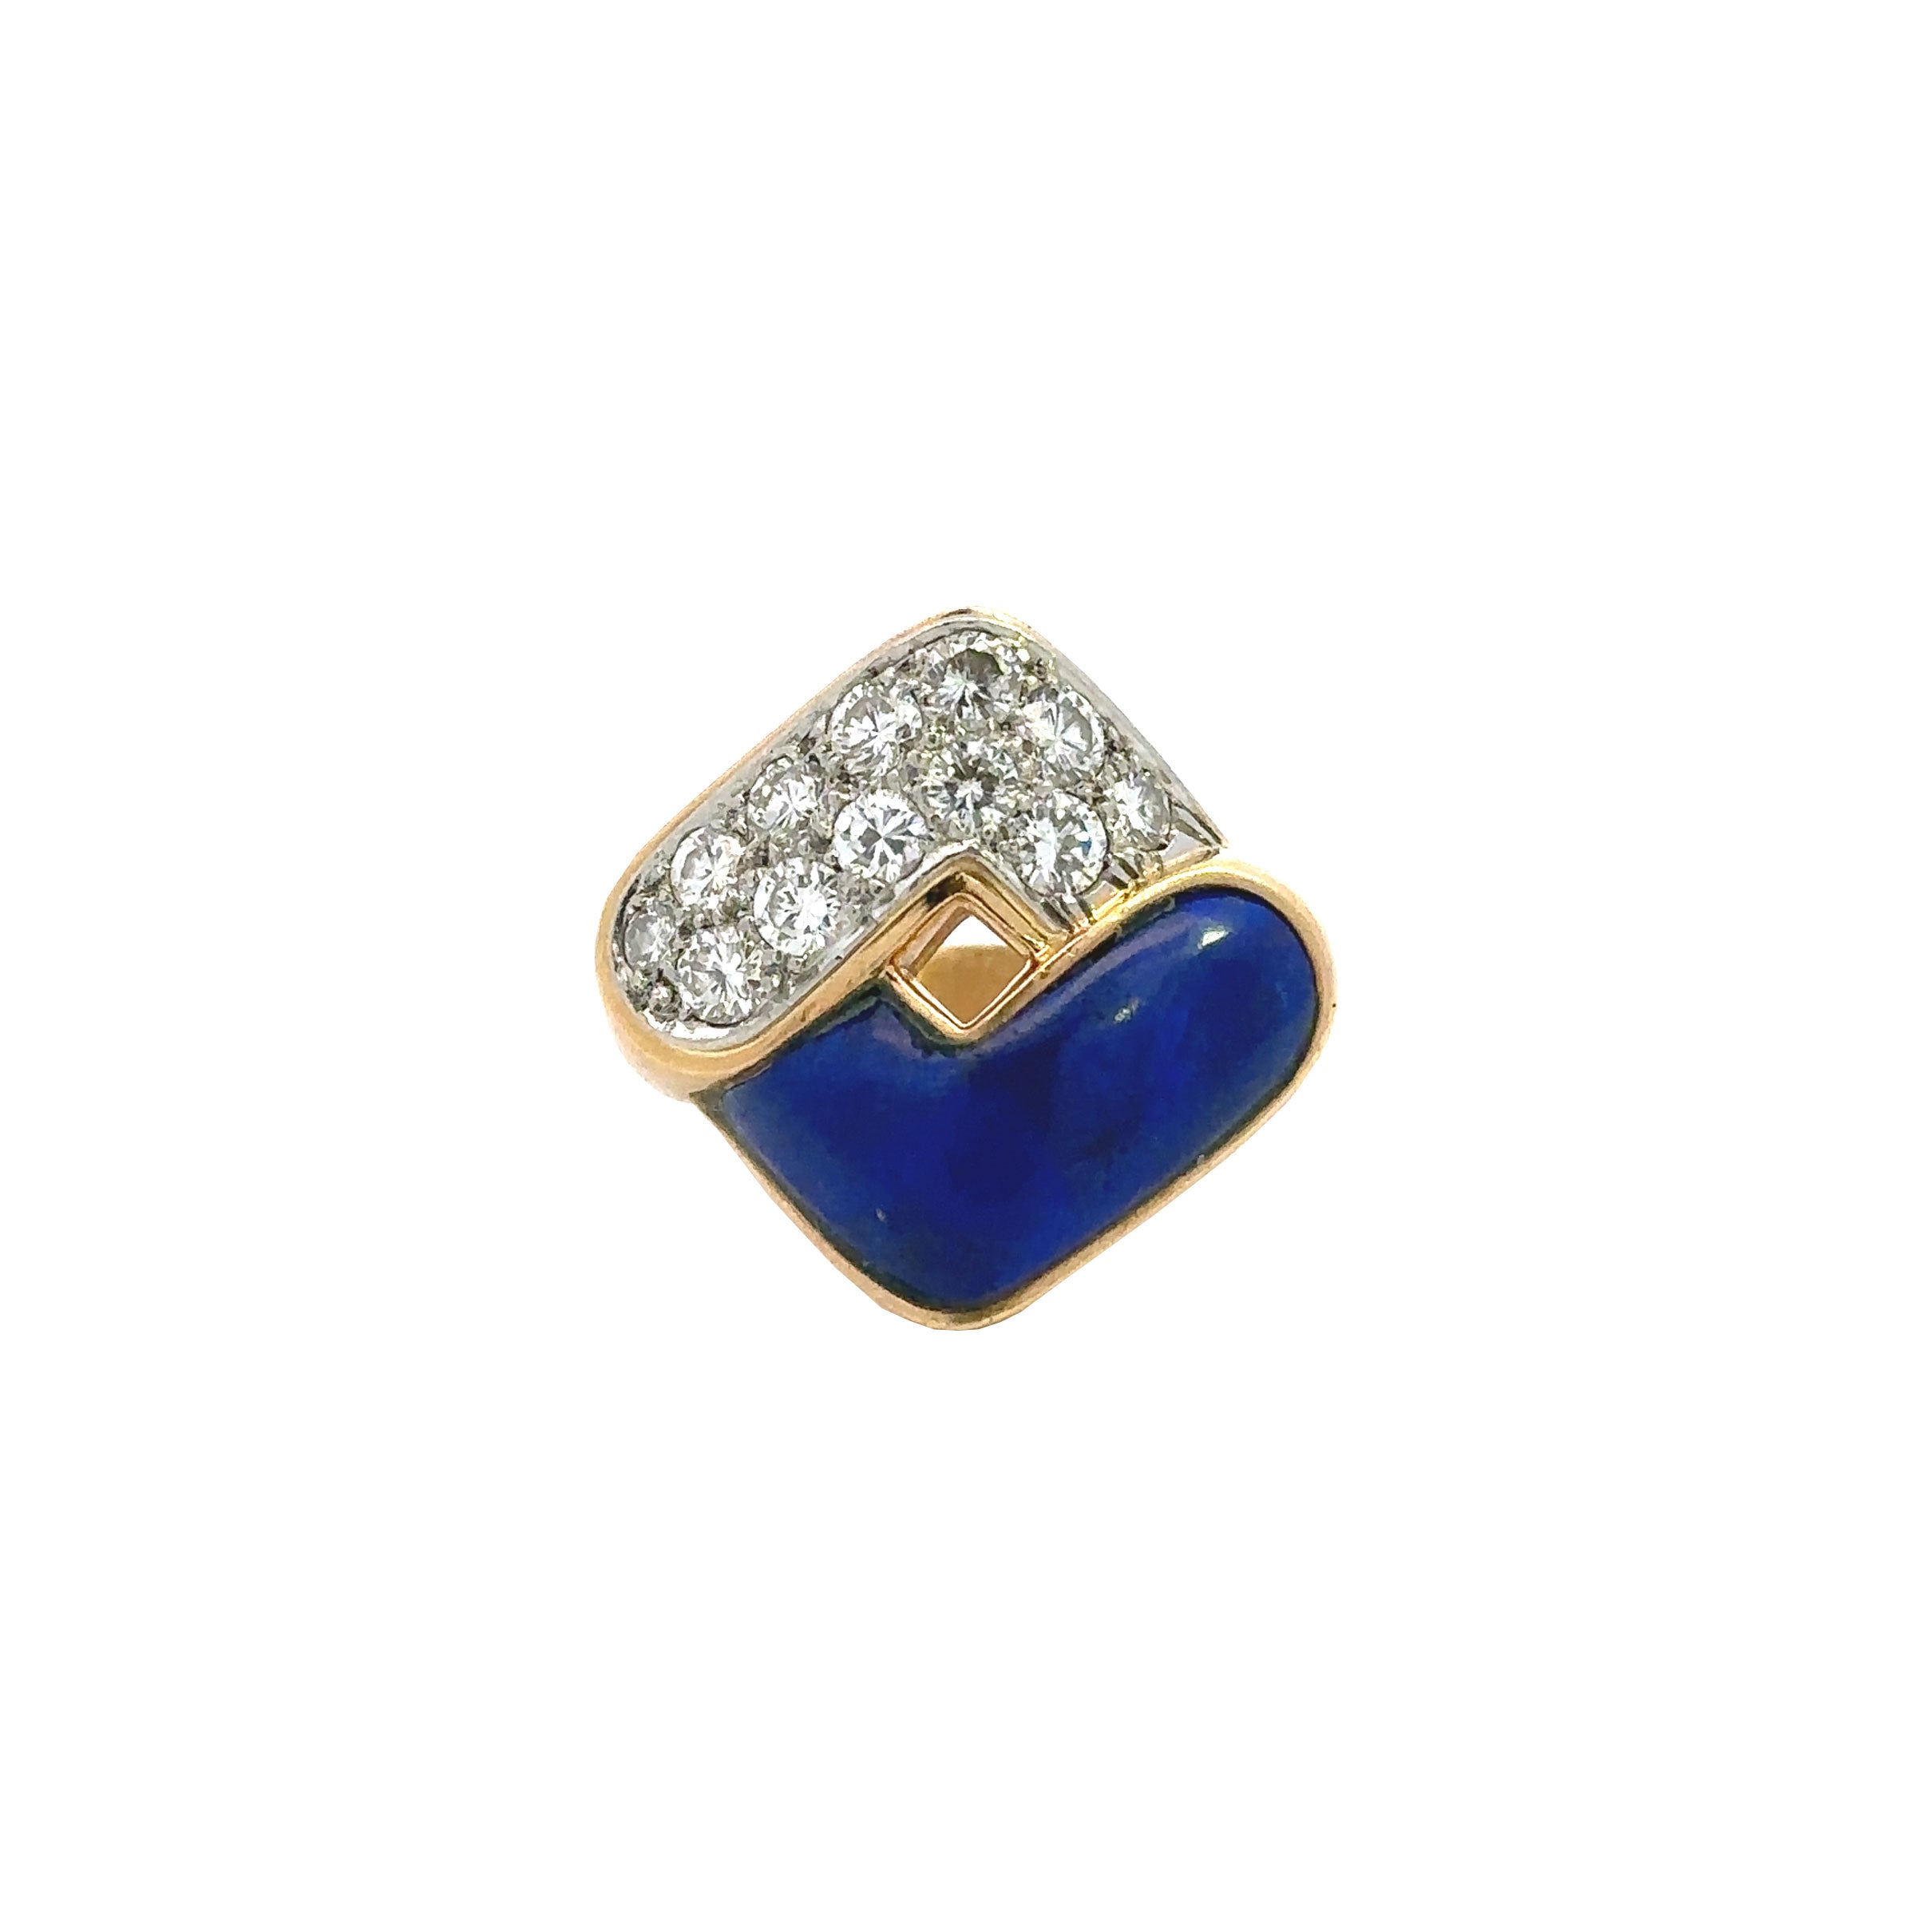 Vintage French Lapis and Diamond Ring - Be On Park